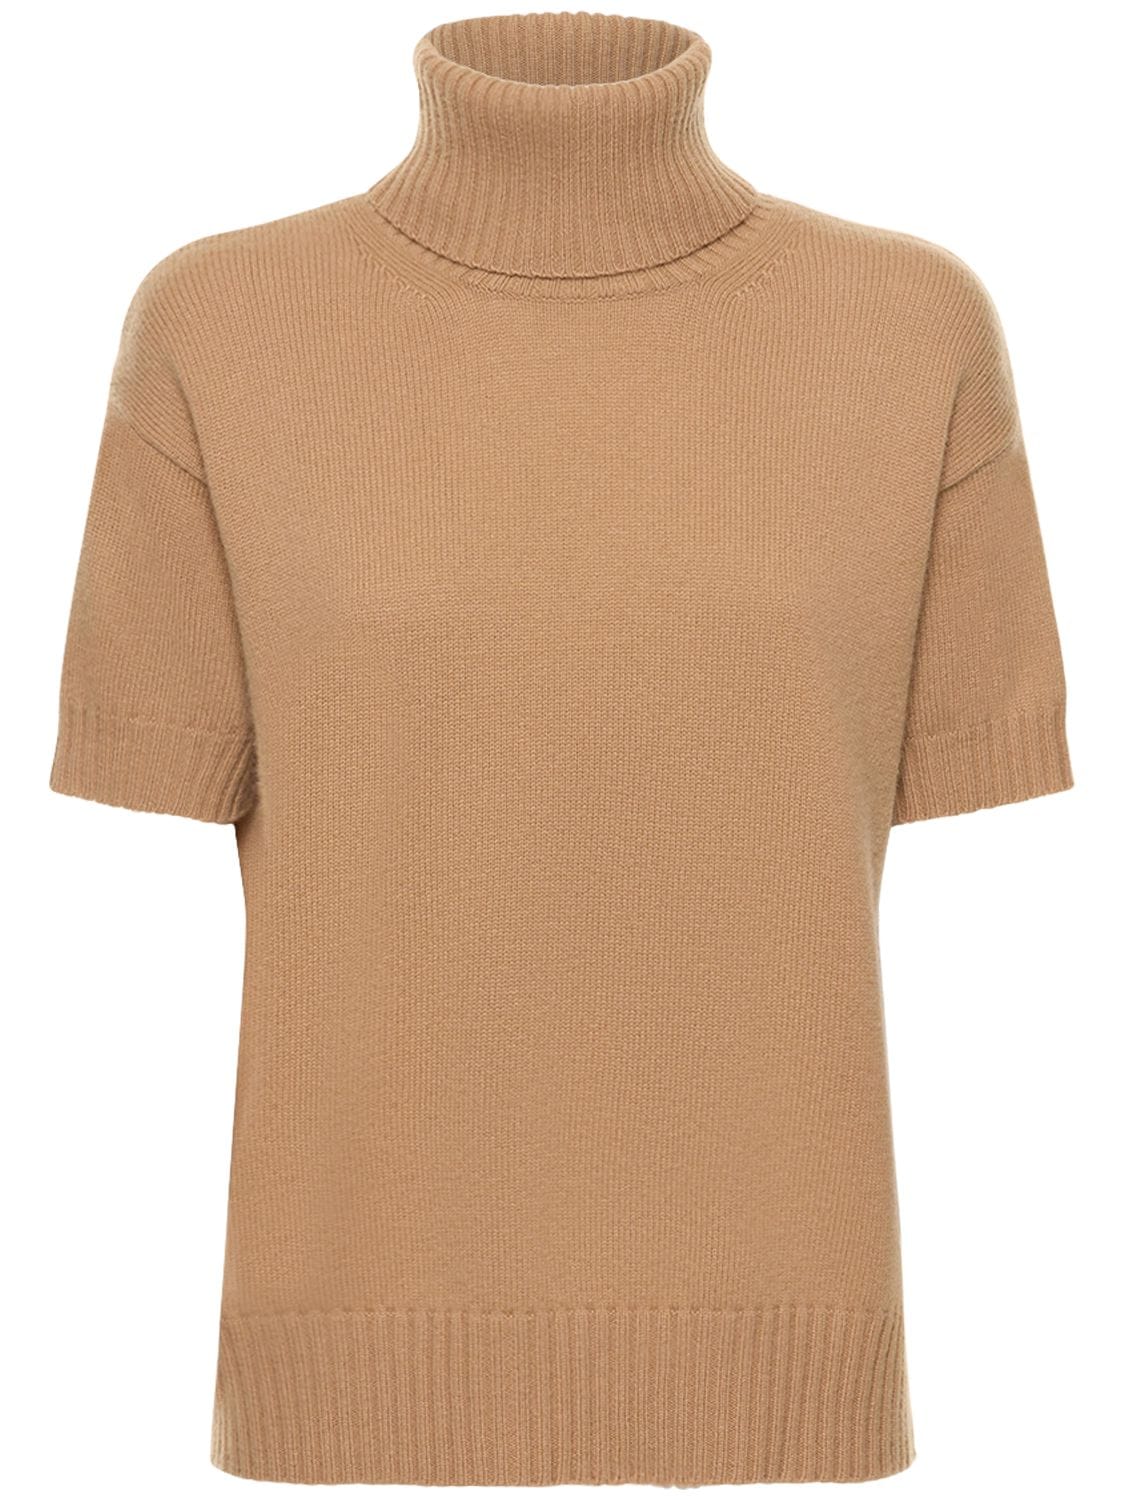 Image of Lvr Exclusive Wool & Cashmere Top